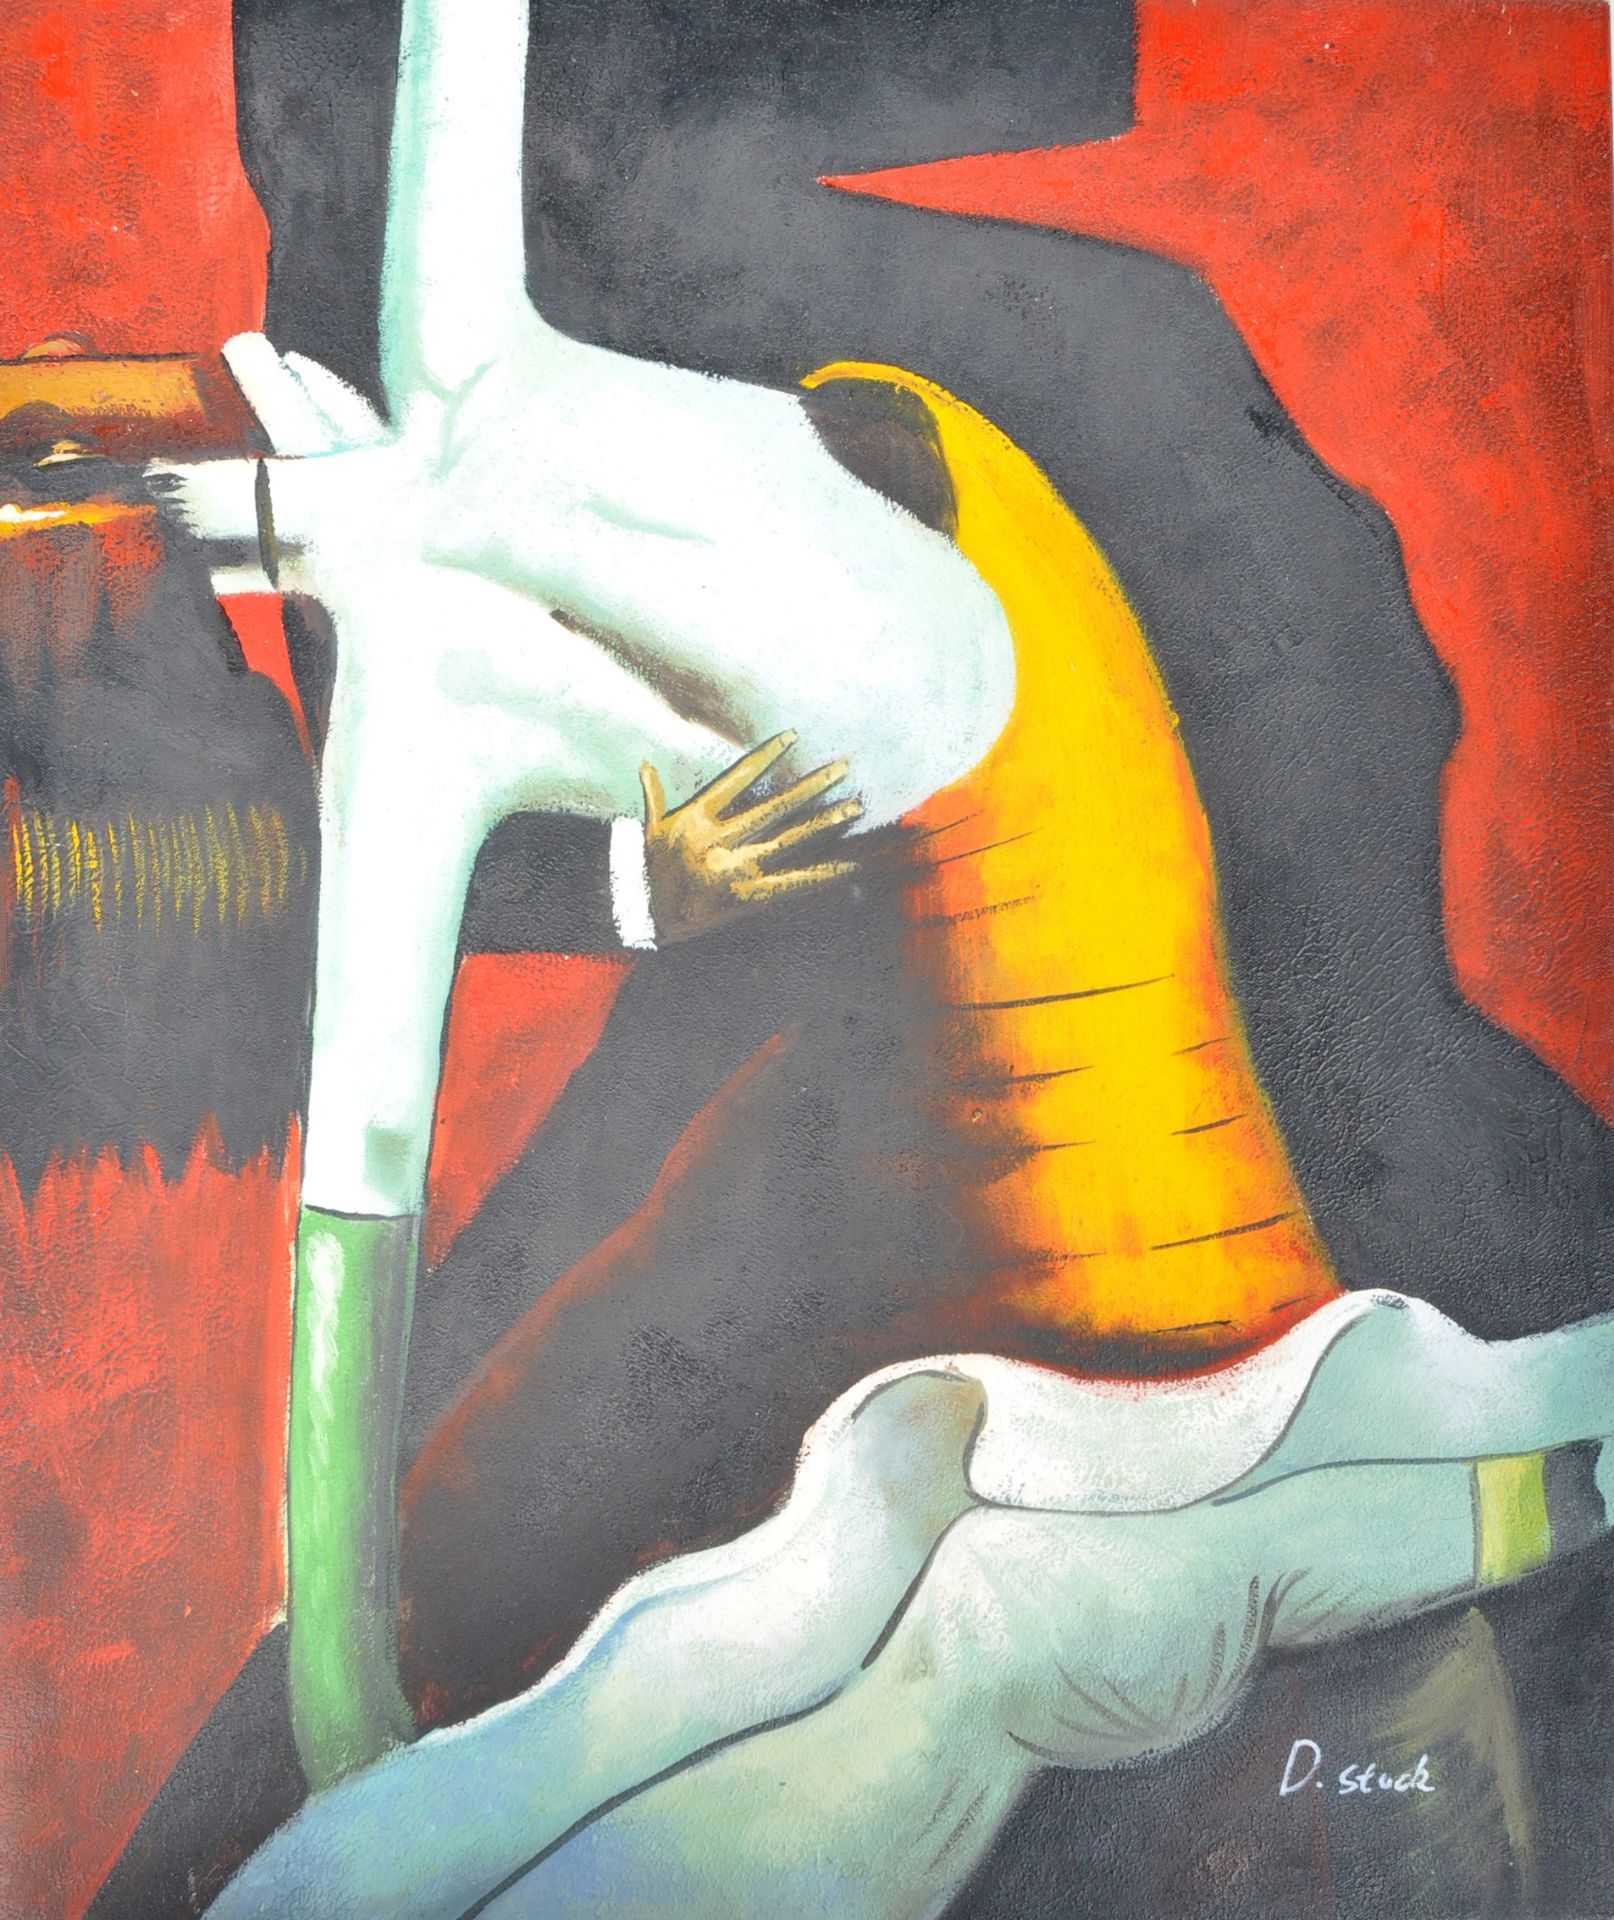 D STACK - 20TH CENTURY SURREAL OIL ON CANVAS PAINTING - Image 3 of 7